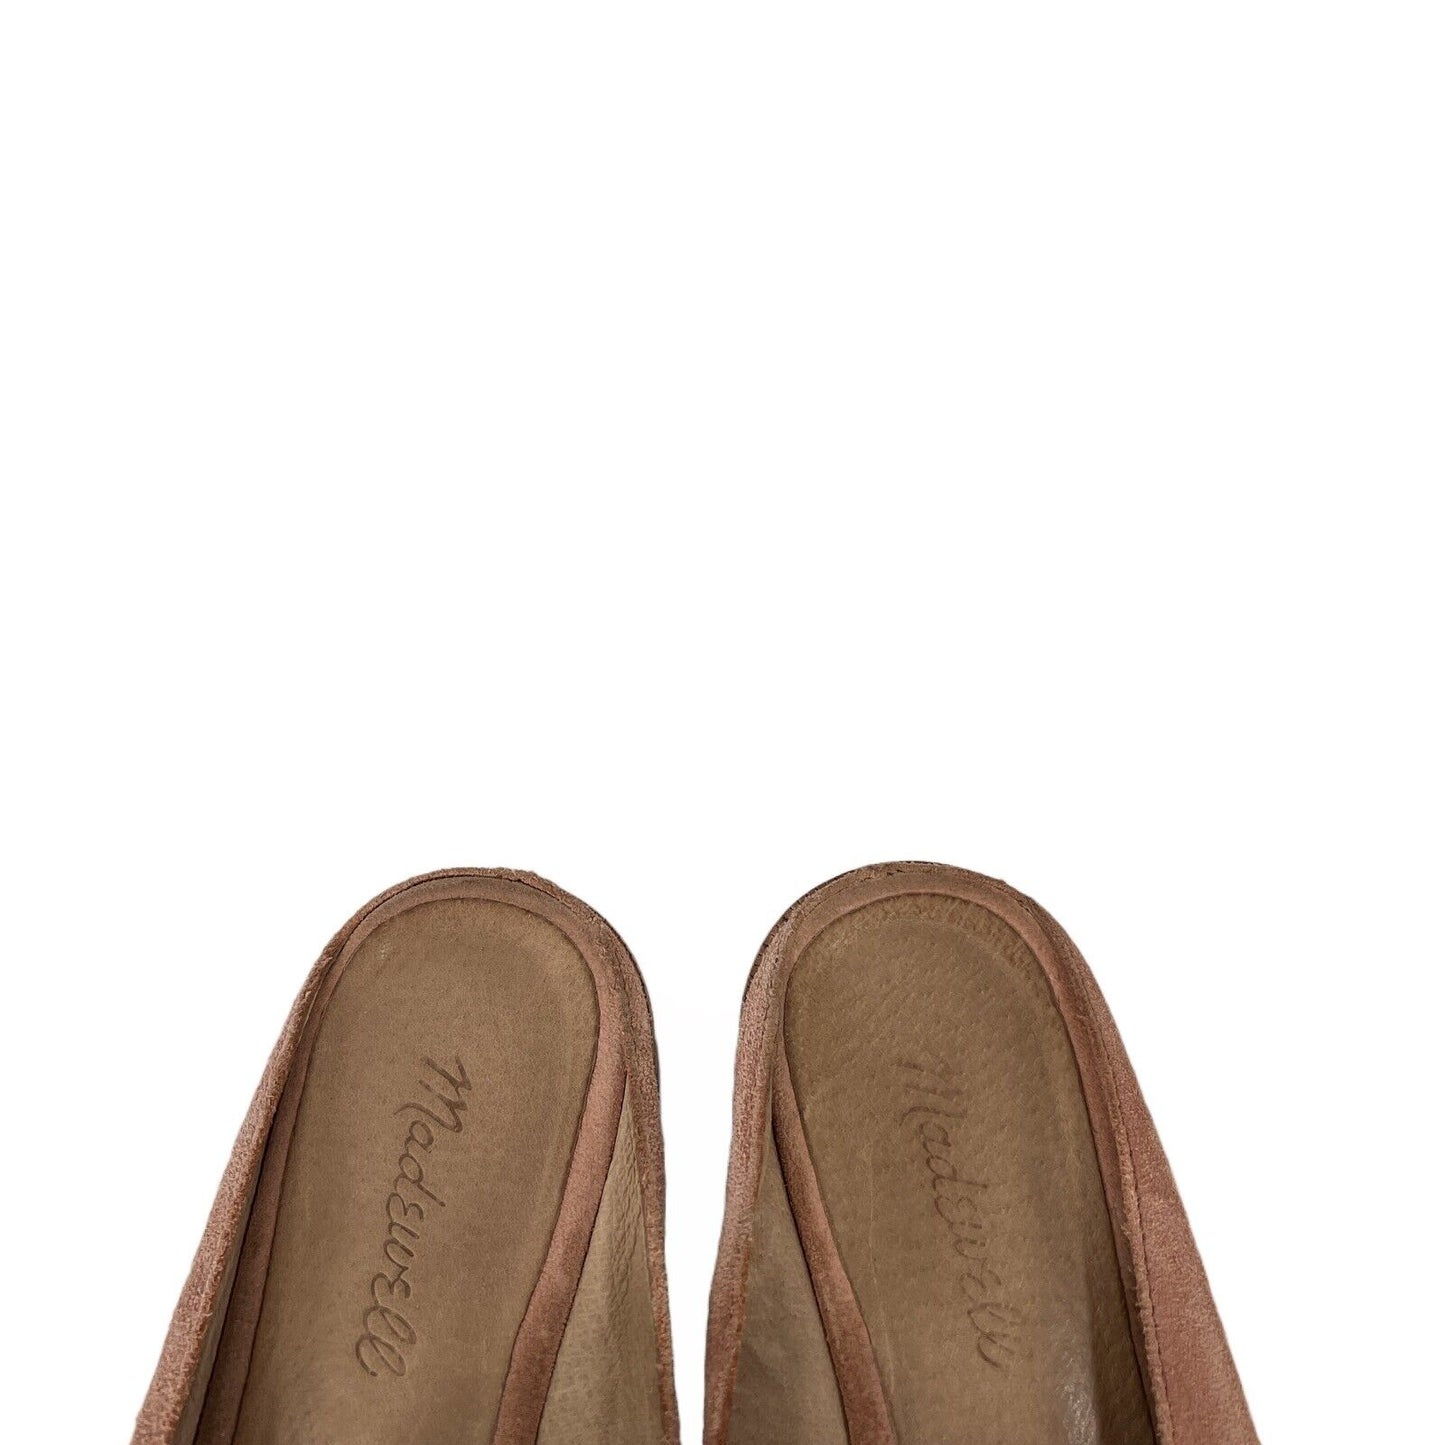 Madewell Women's Pink Suede Elinor Slip On Loafers - 9